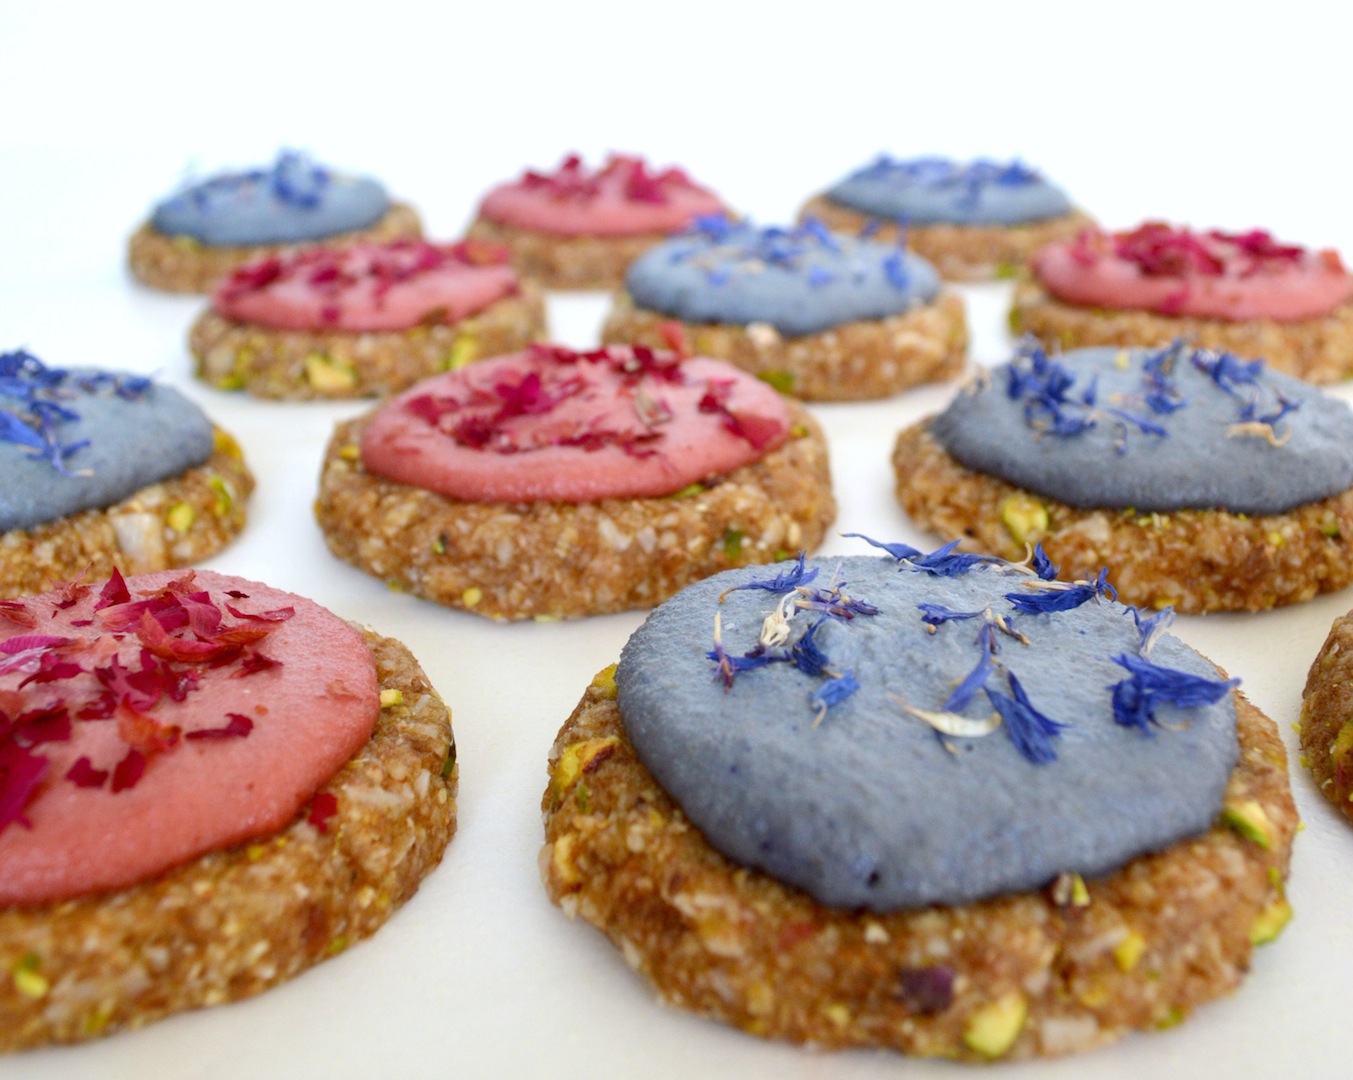 Pistachio Coconut Cookies with Rose and Lavender Cashew Cream (Raw, Vegan)  by Plantbased Baker